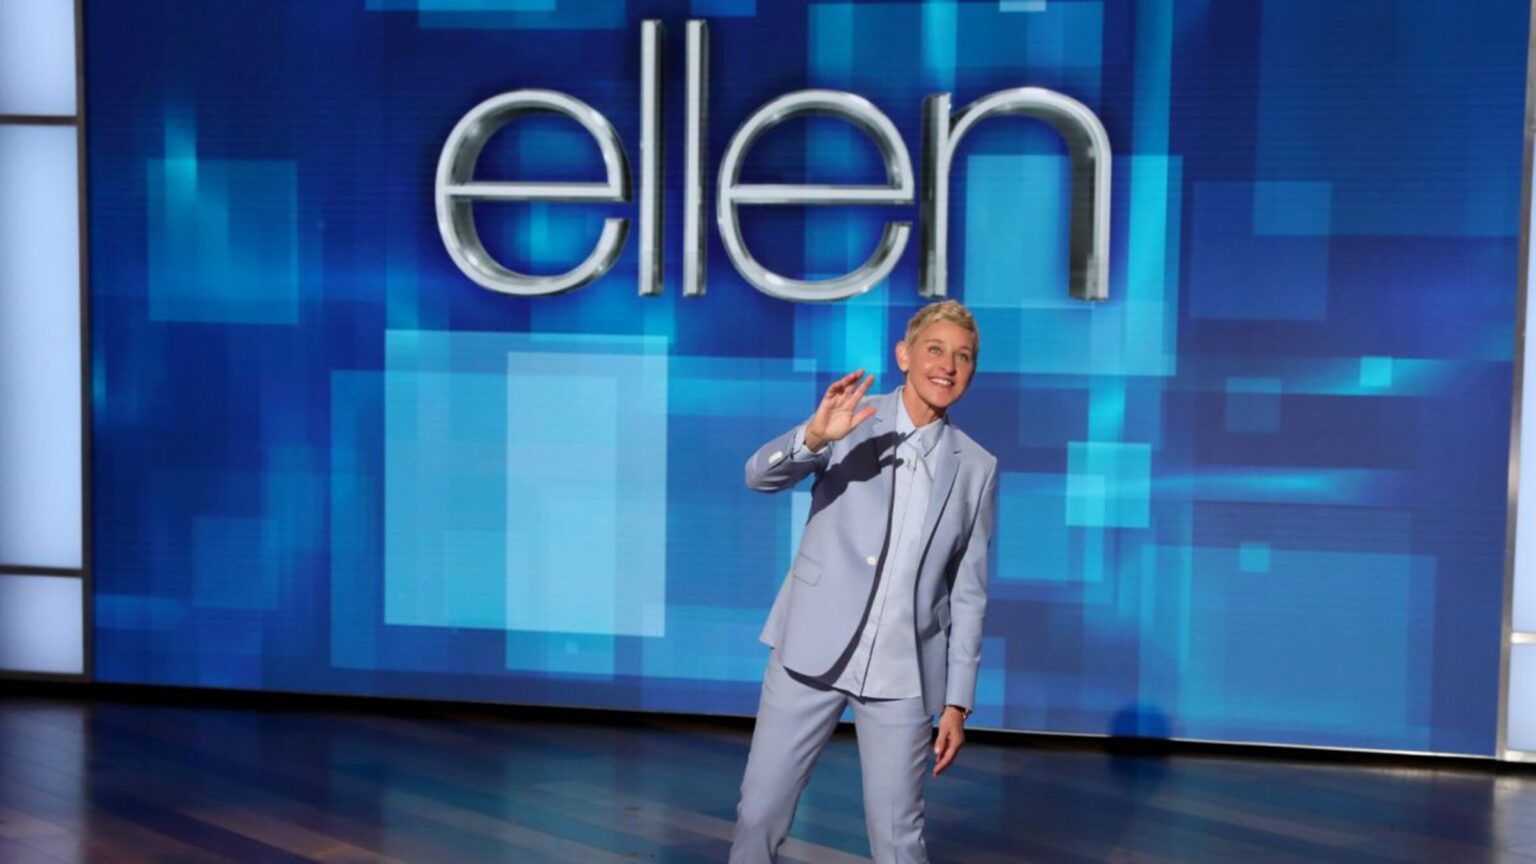 Do you want tickets to 'The Ellen DeGeneres Show' when lockdown is over? Here are all the reasons why you might not want to go.